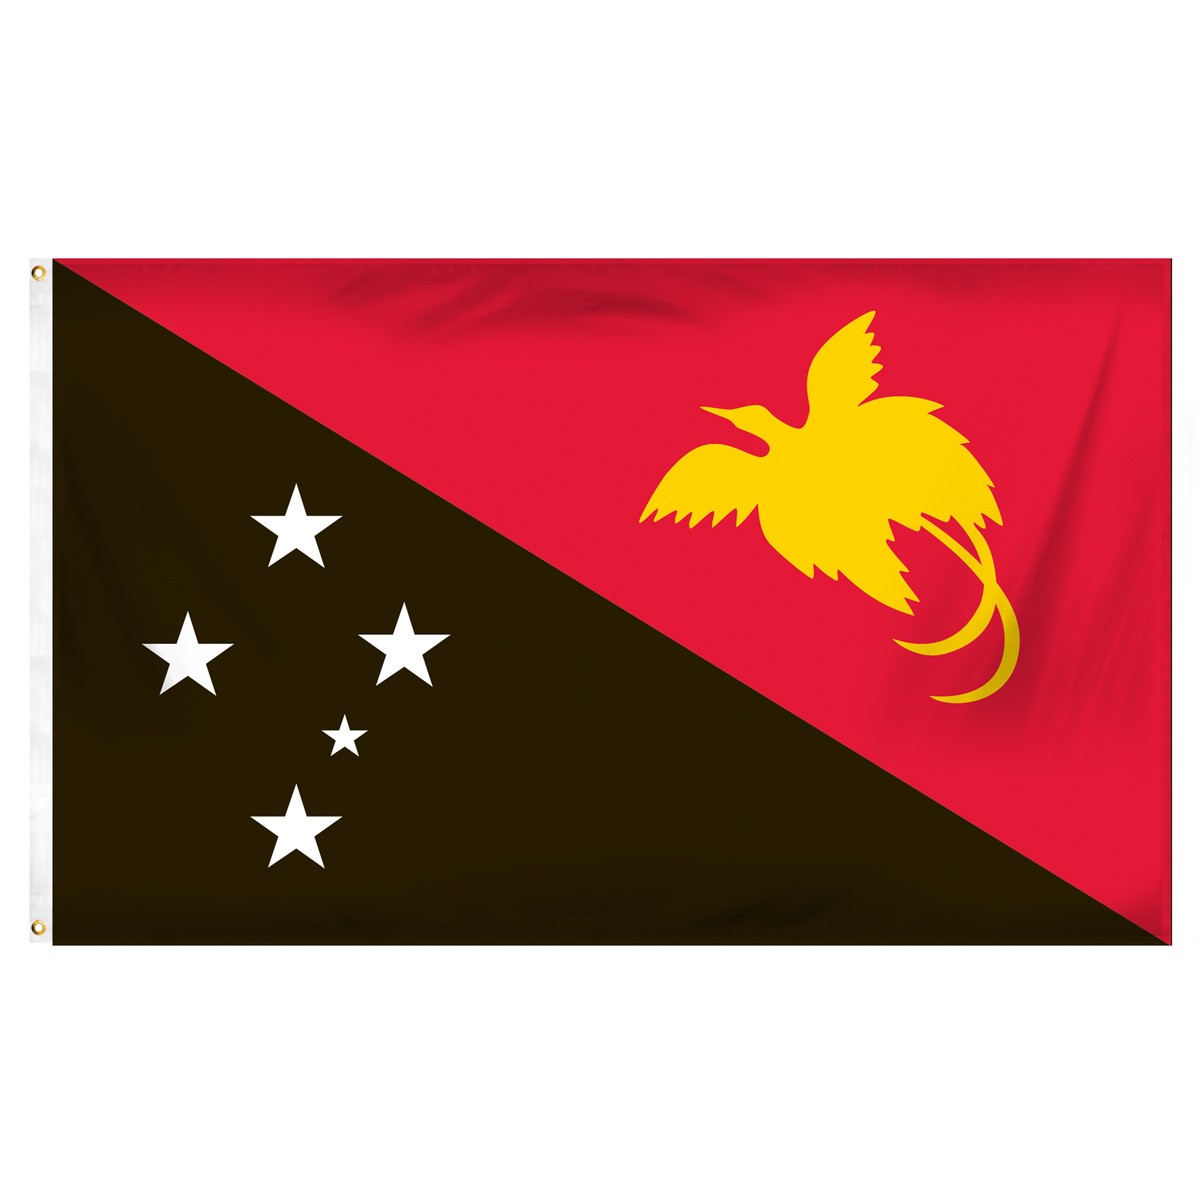 Papua New Guinea Submit Flags and Flags